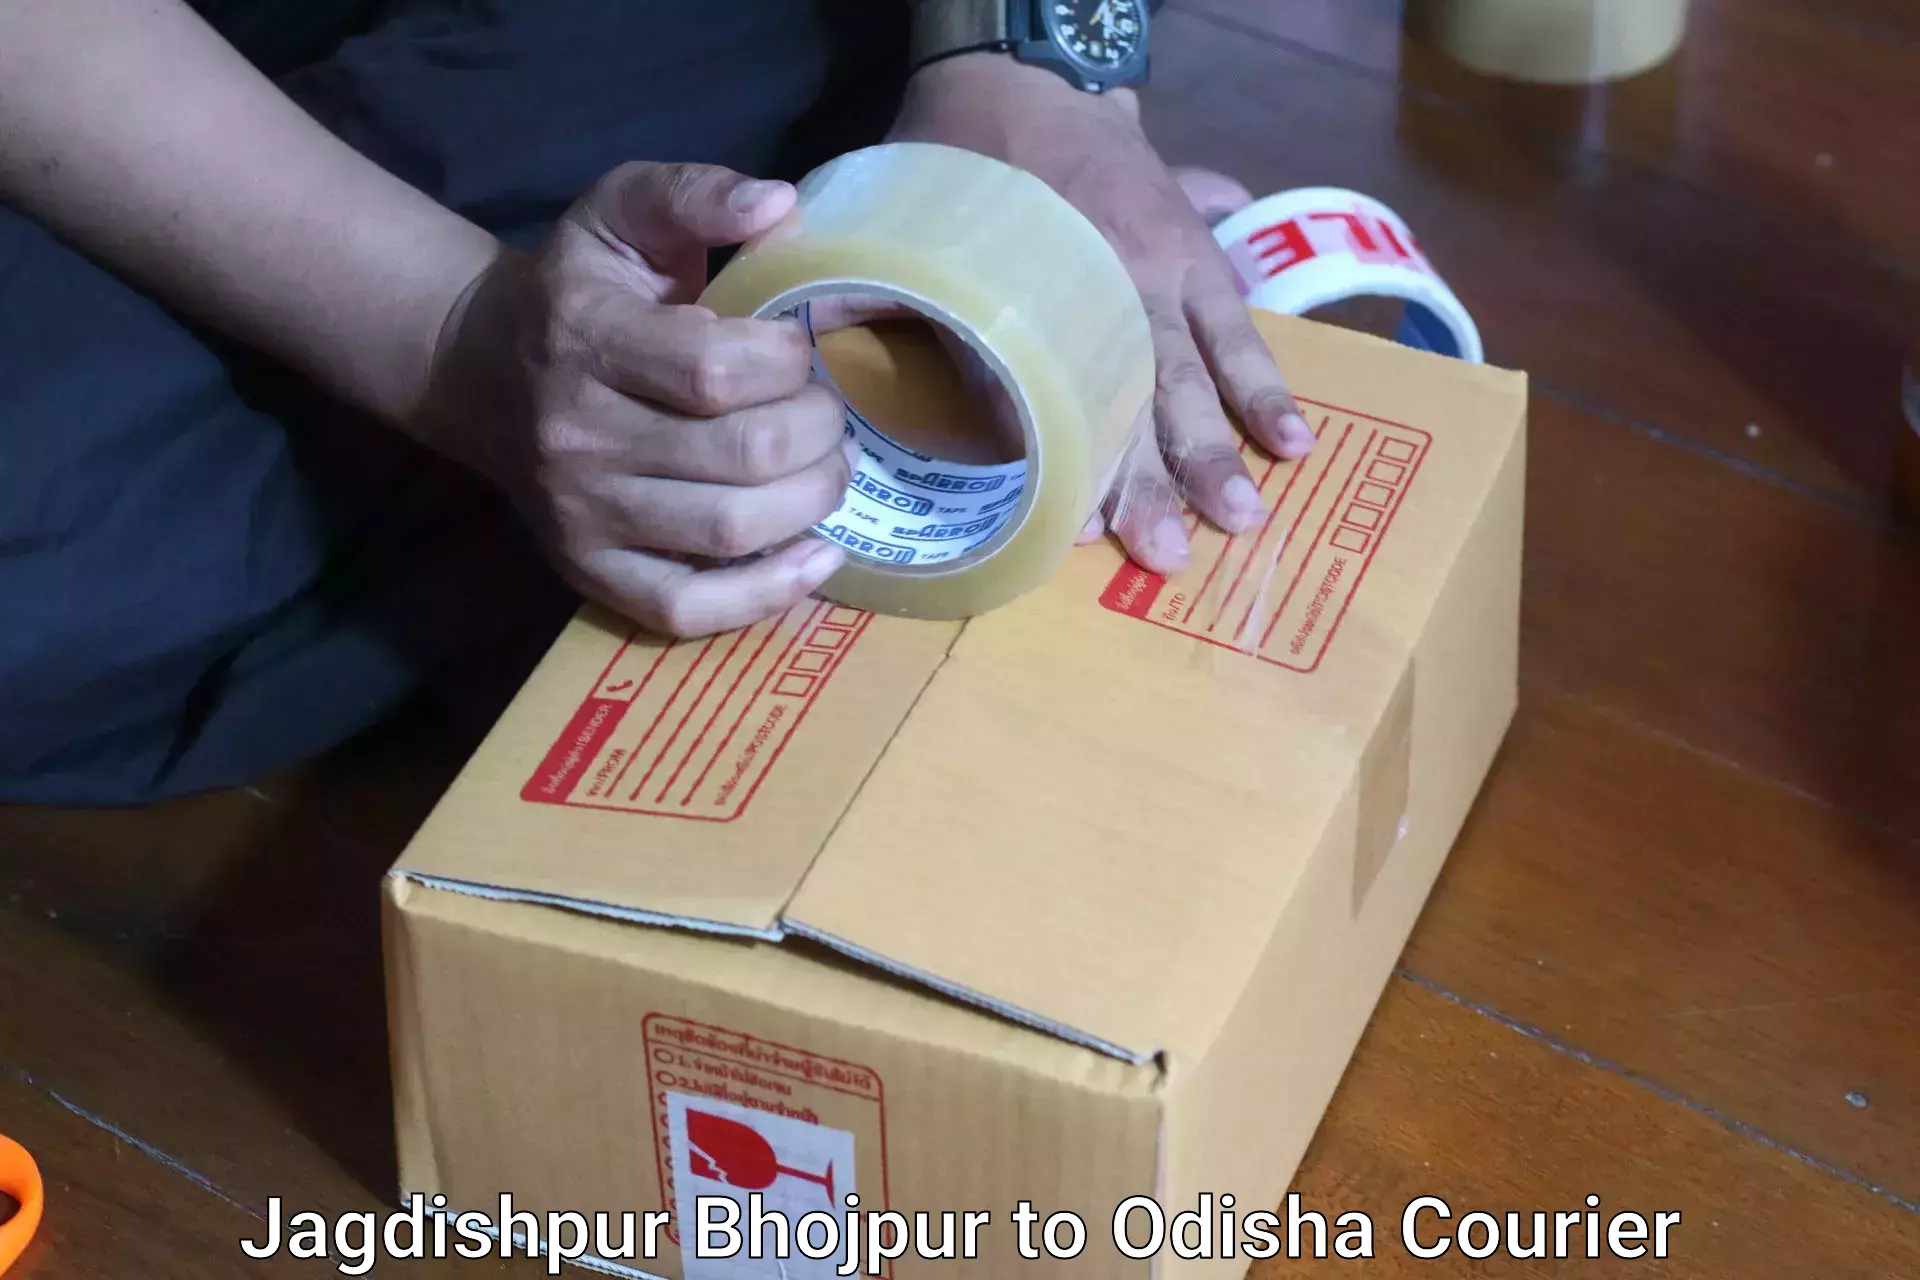 Personal effects shipping Jagdishpur Bhojpur to Aul